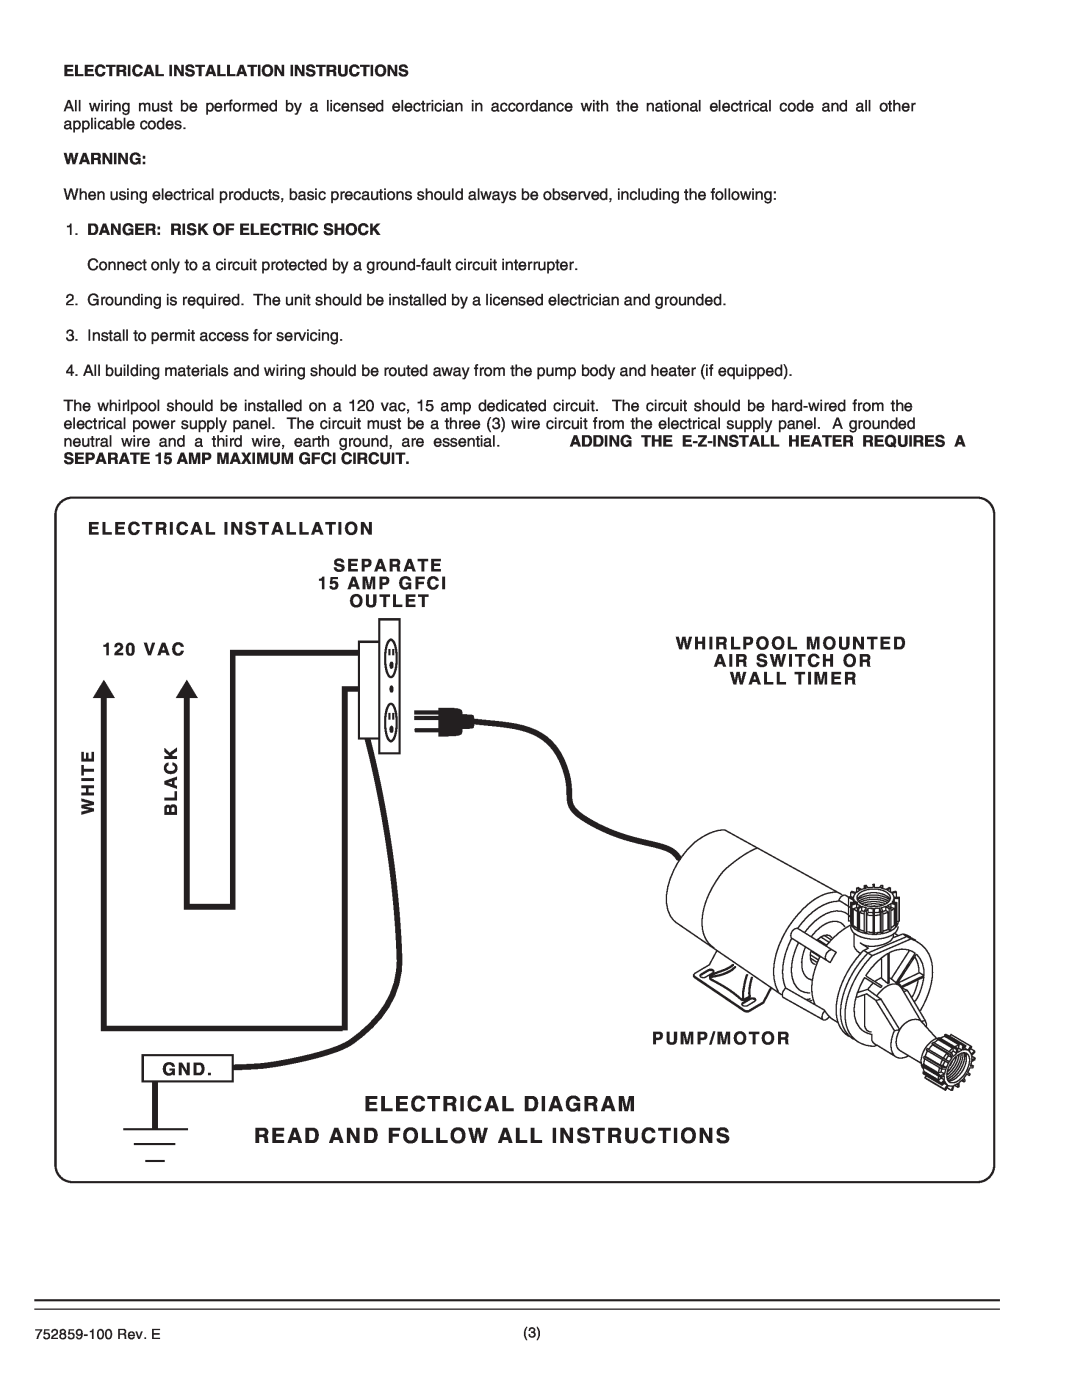 American Standard 2908EC Electrical Diagram, Read And Follow All Instructions, Electrical Installation Instructions 